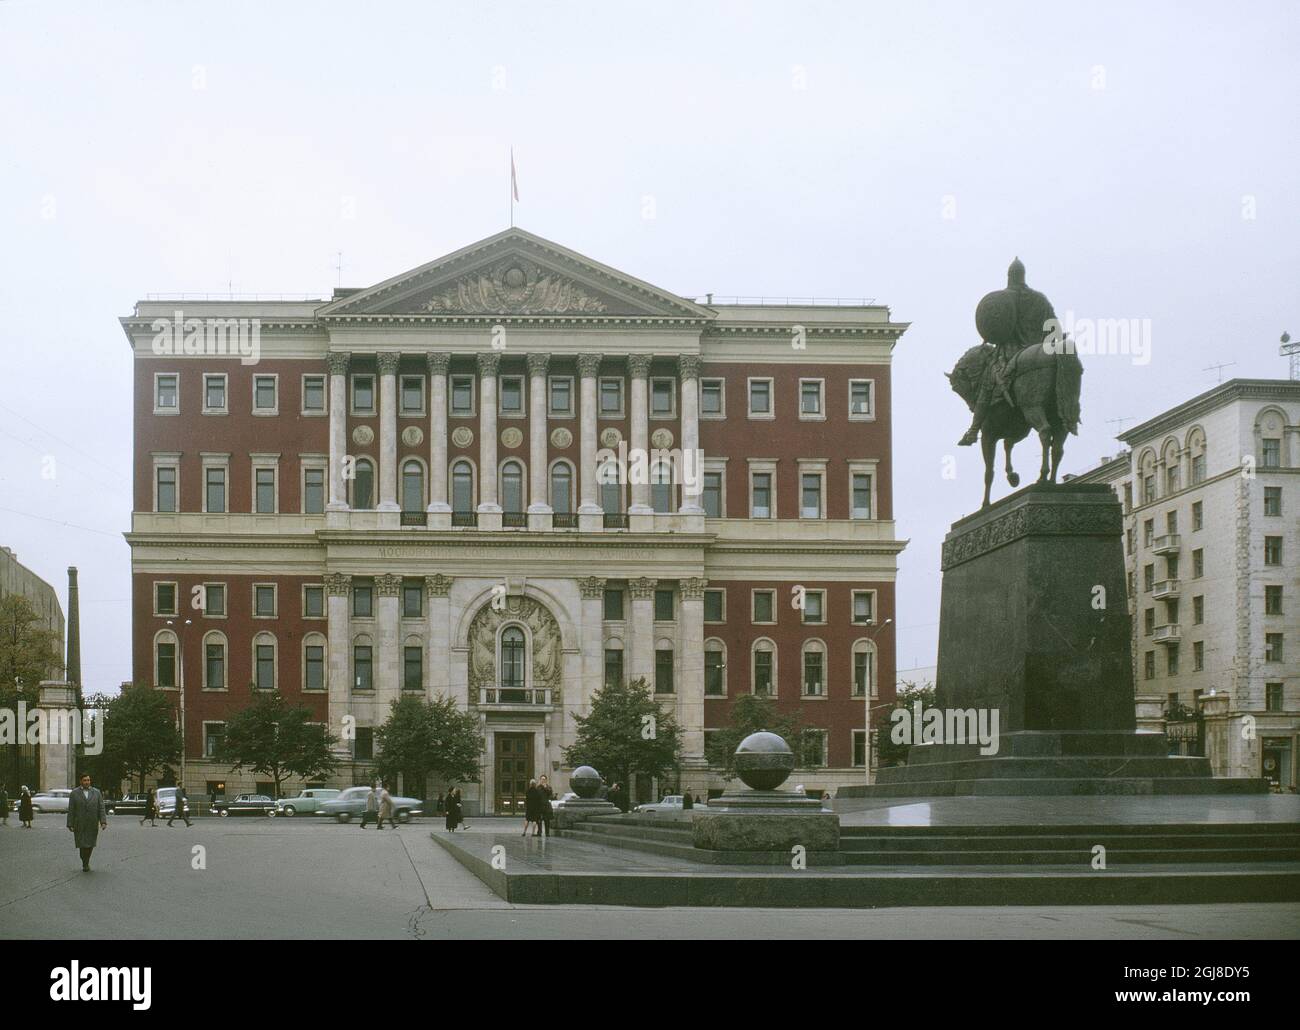 FILE MOSCOW 1974 The Moscow Soviet's building, the Governor's Palace at Tverskaya street in Moscow. The Yury Dolgoruky monument was erected in 1954 for the 800-year anniversary of Moscow. Foto: Jan Bergman / SCANPIX Kod: 11112  Stock Photo